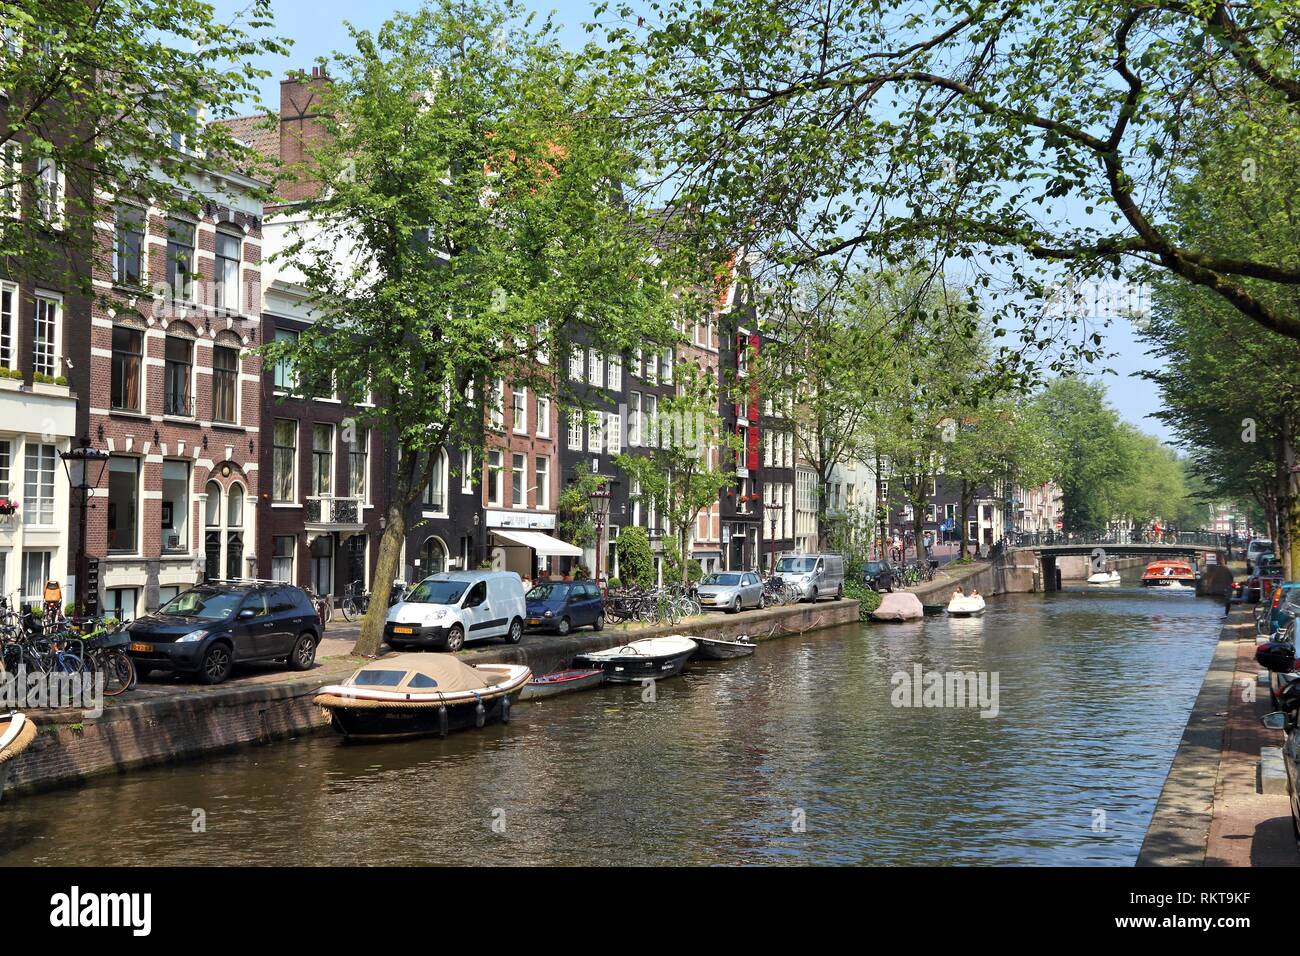 AMSTERDAM, NETHERLANDS - JULY 7, 2017: Leidsegracht canal in Amsterdam, Netherlands. Amsterdam is the capital city of The Netherlands. Stock Photo